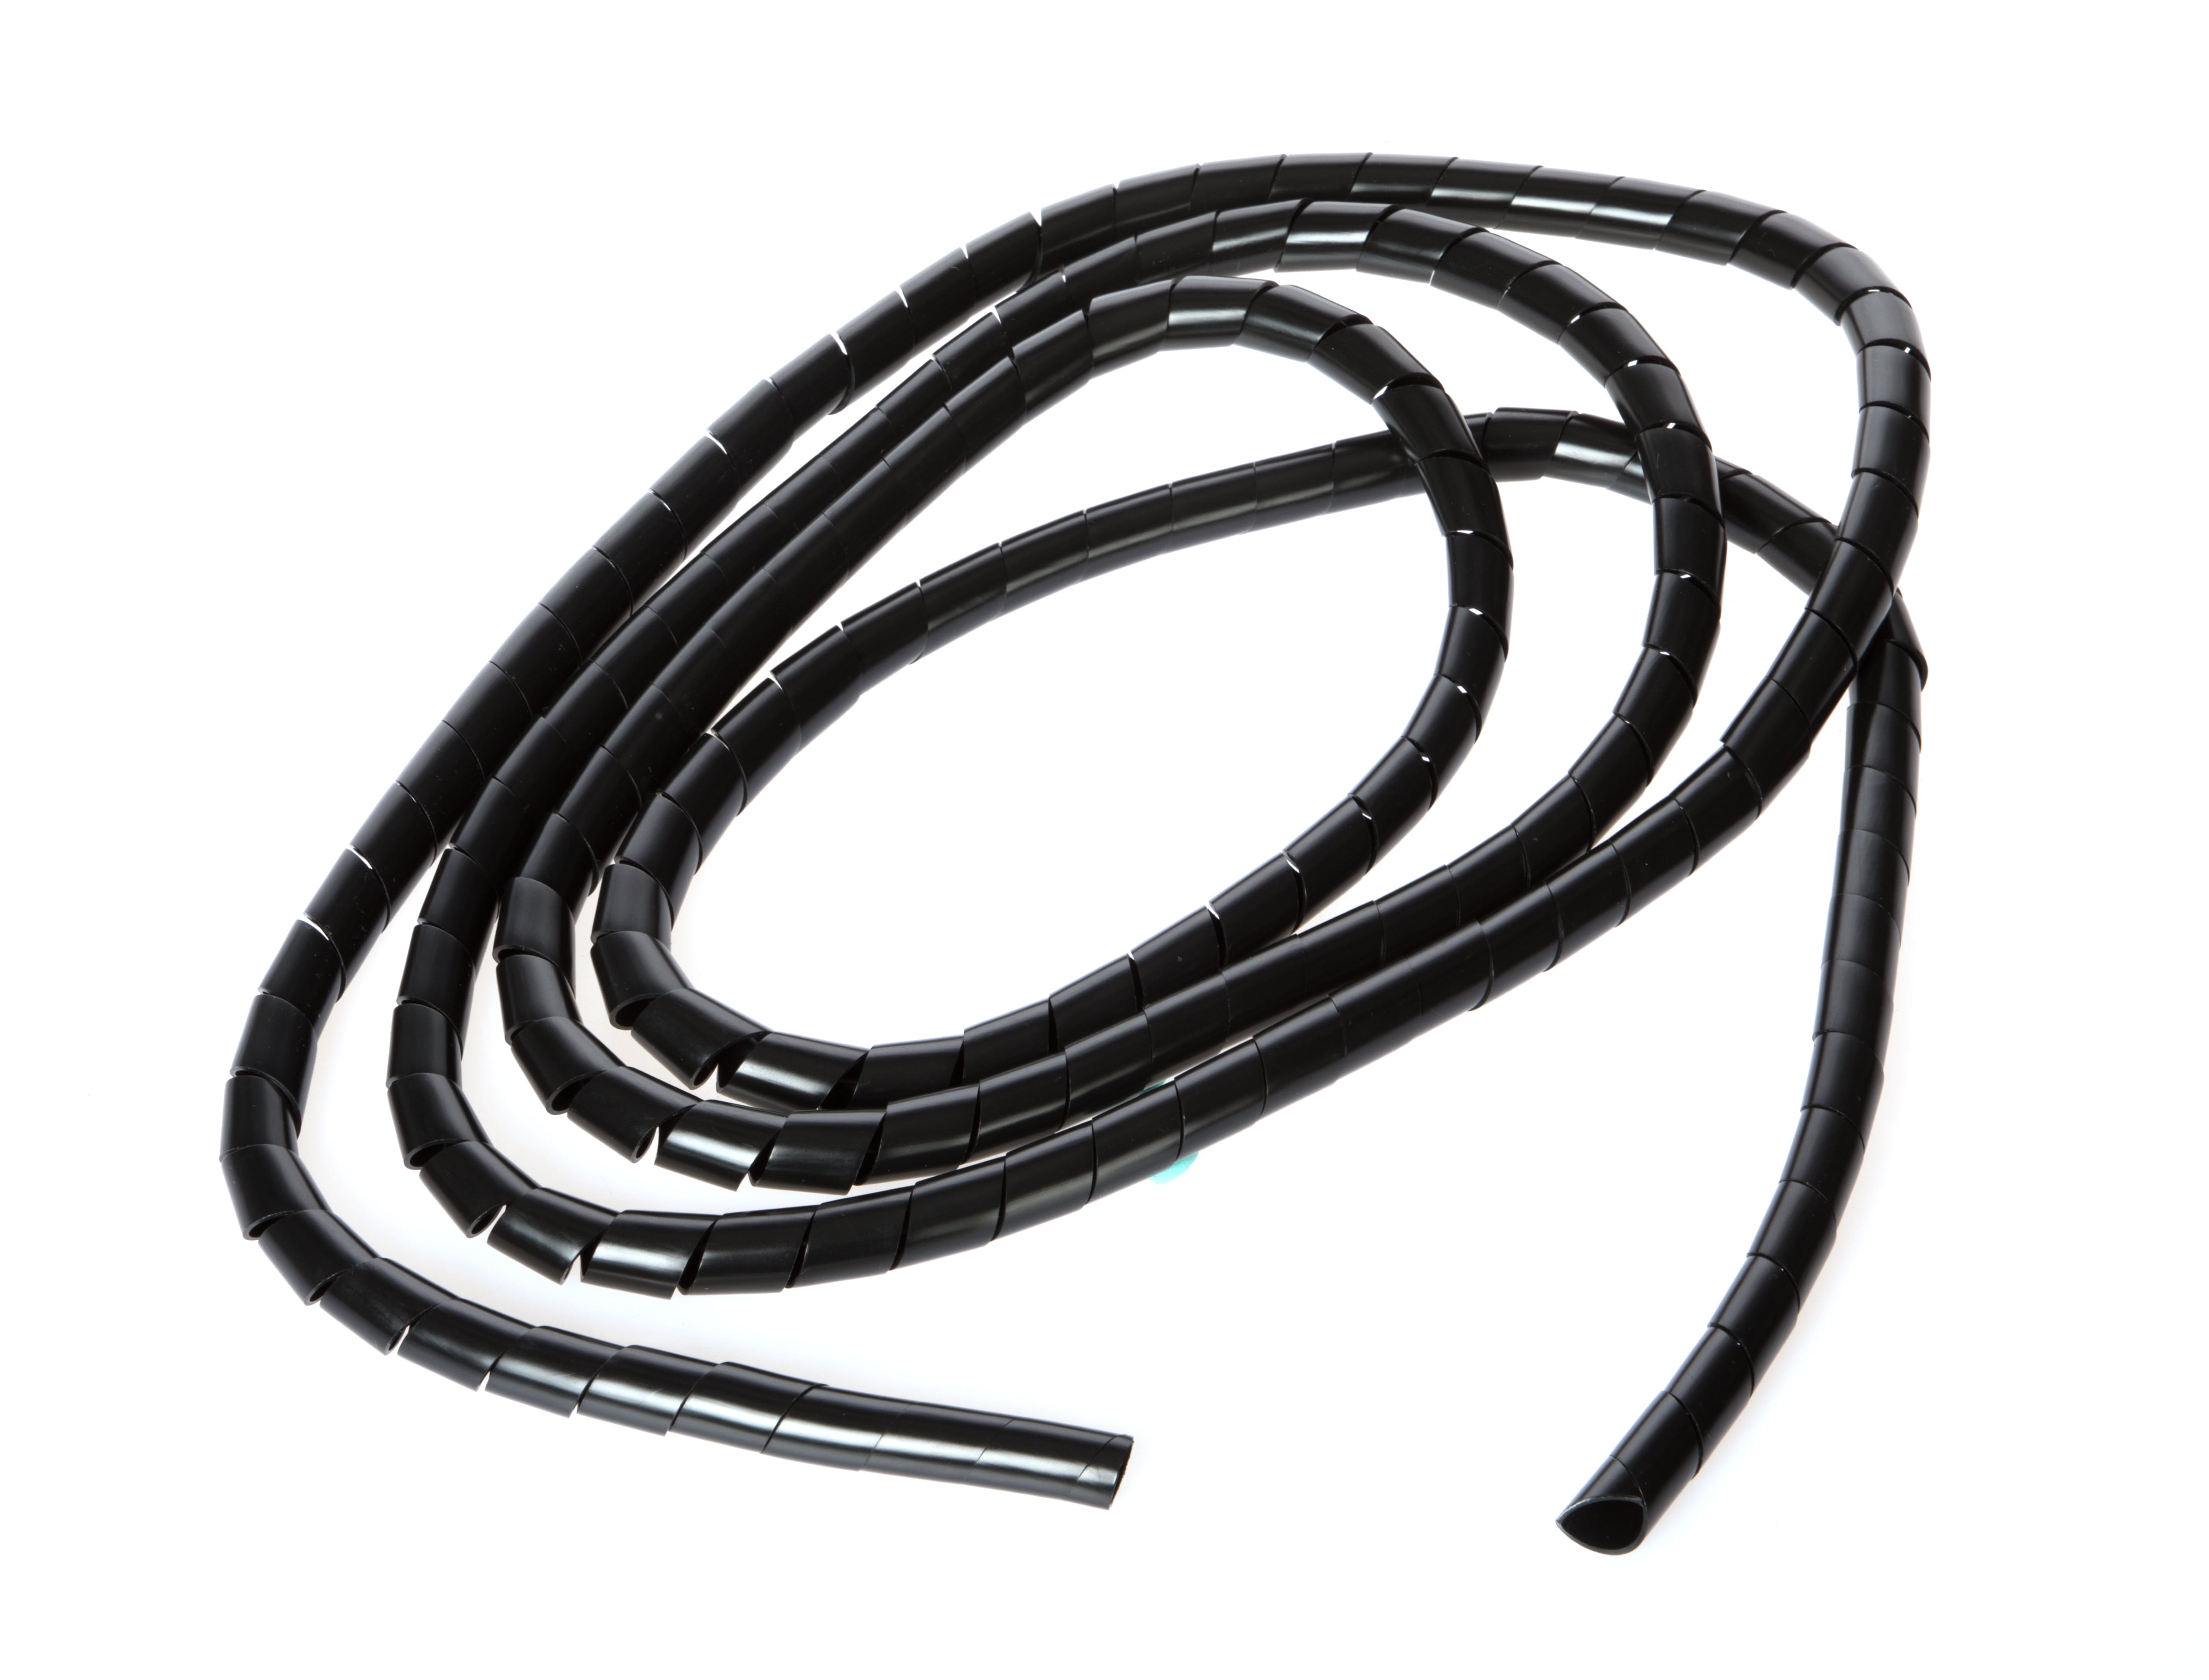 Hyper Tough 1/4in x 6 ft Vinyl Covered Flexible Open Loop Cable Lock, Size: 1/4 inch x 6